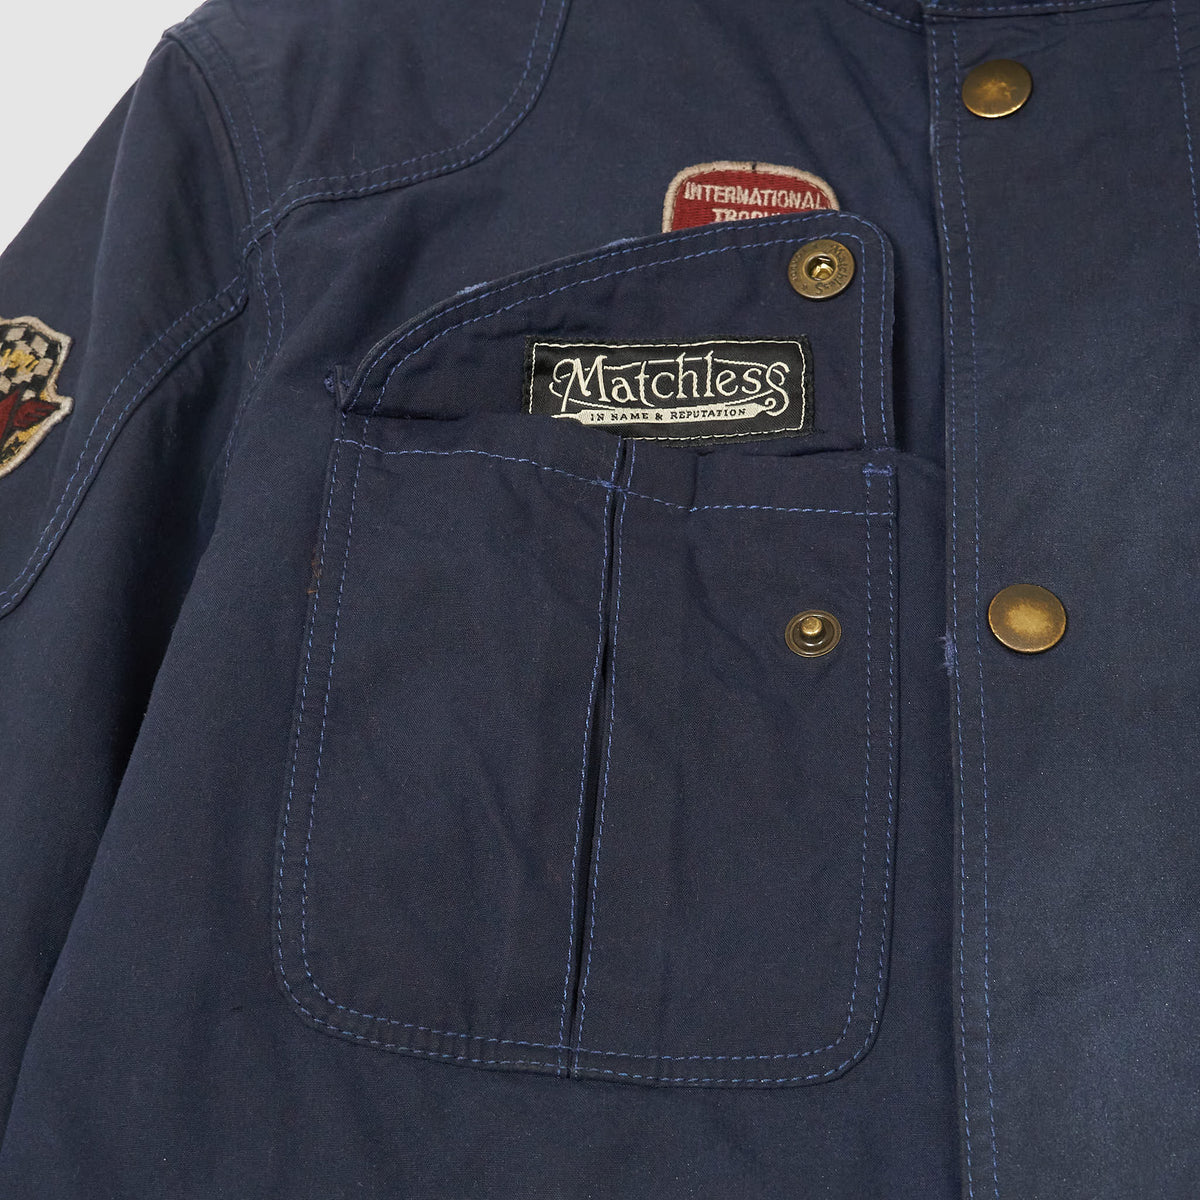 Matchless Road Driver Vintage Style Lightweight Wax-Jacket